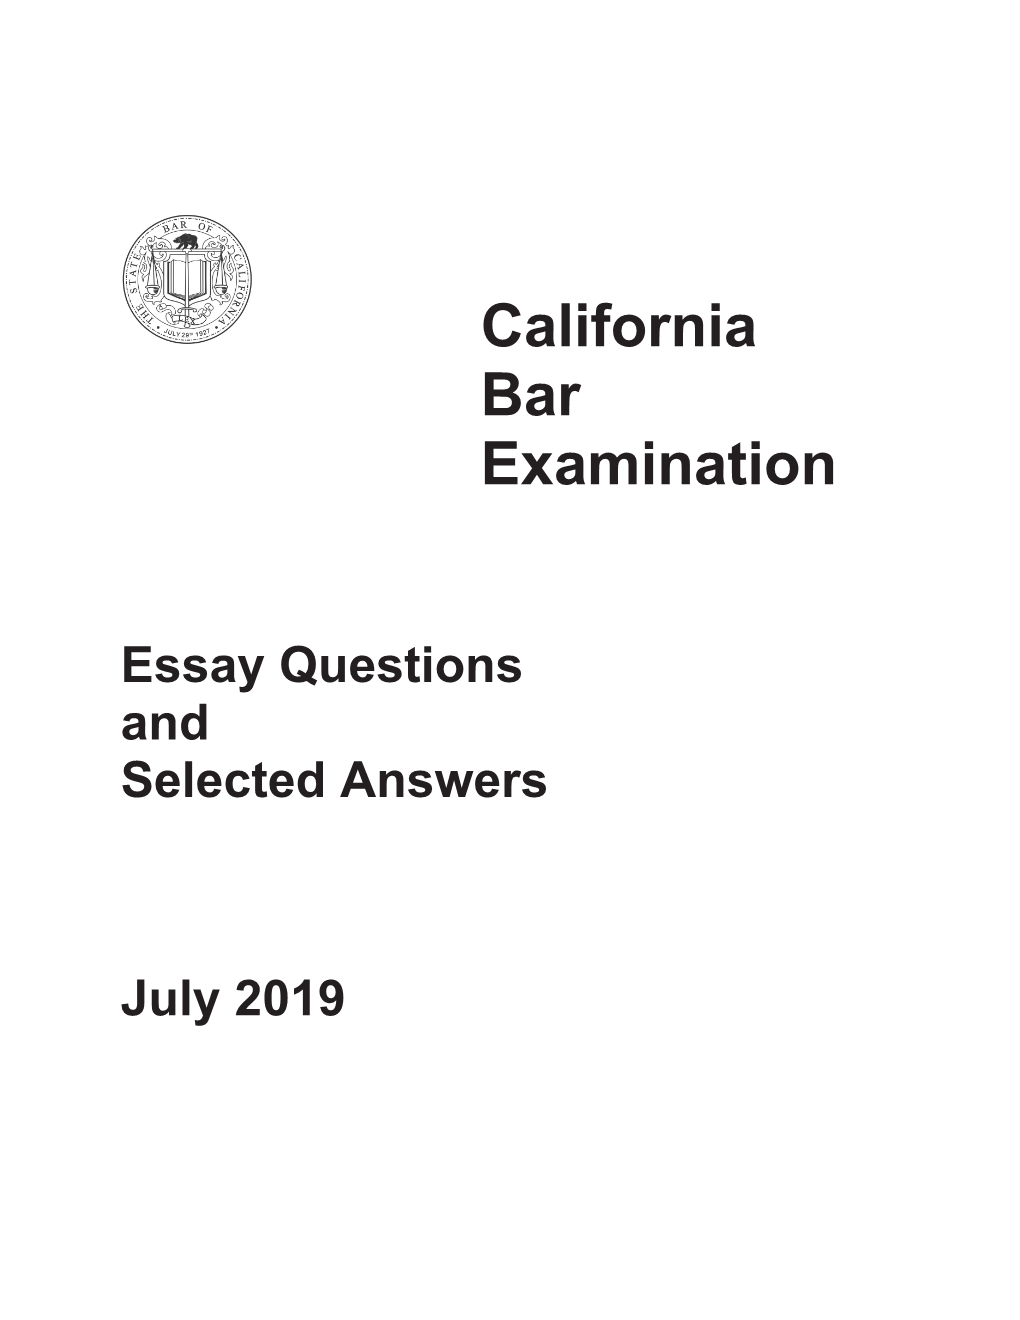 California Bar Examination Essay Questions and Selected Answers July 2019